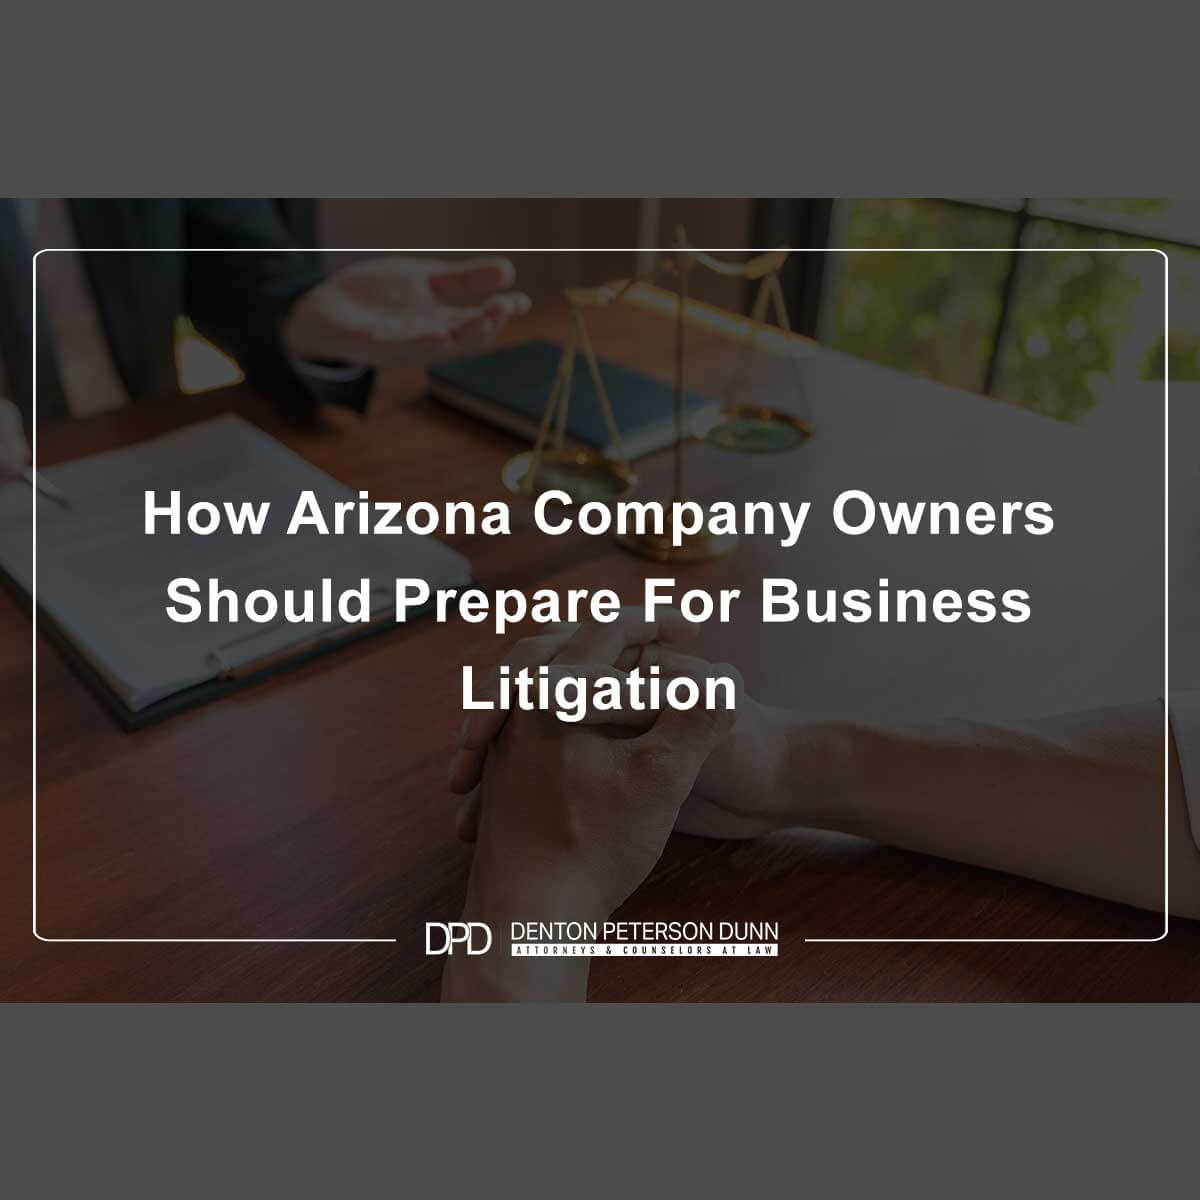 How Arizona Company Owners Should Prepare For Business Litigation